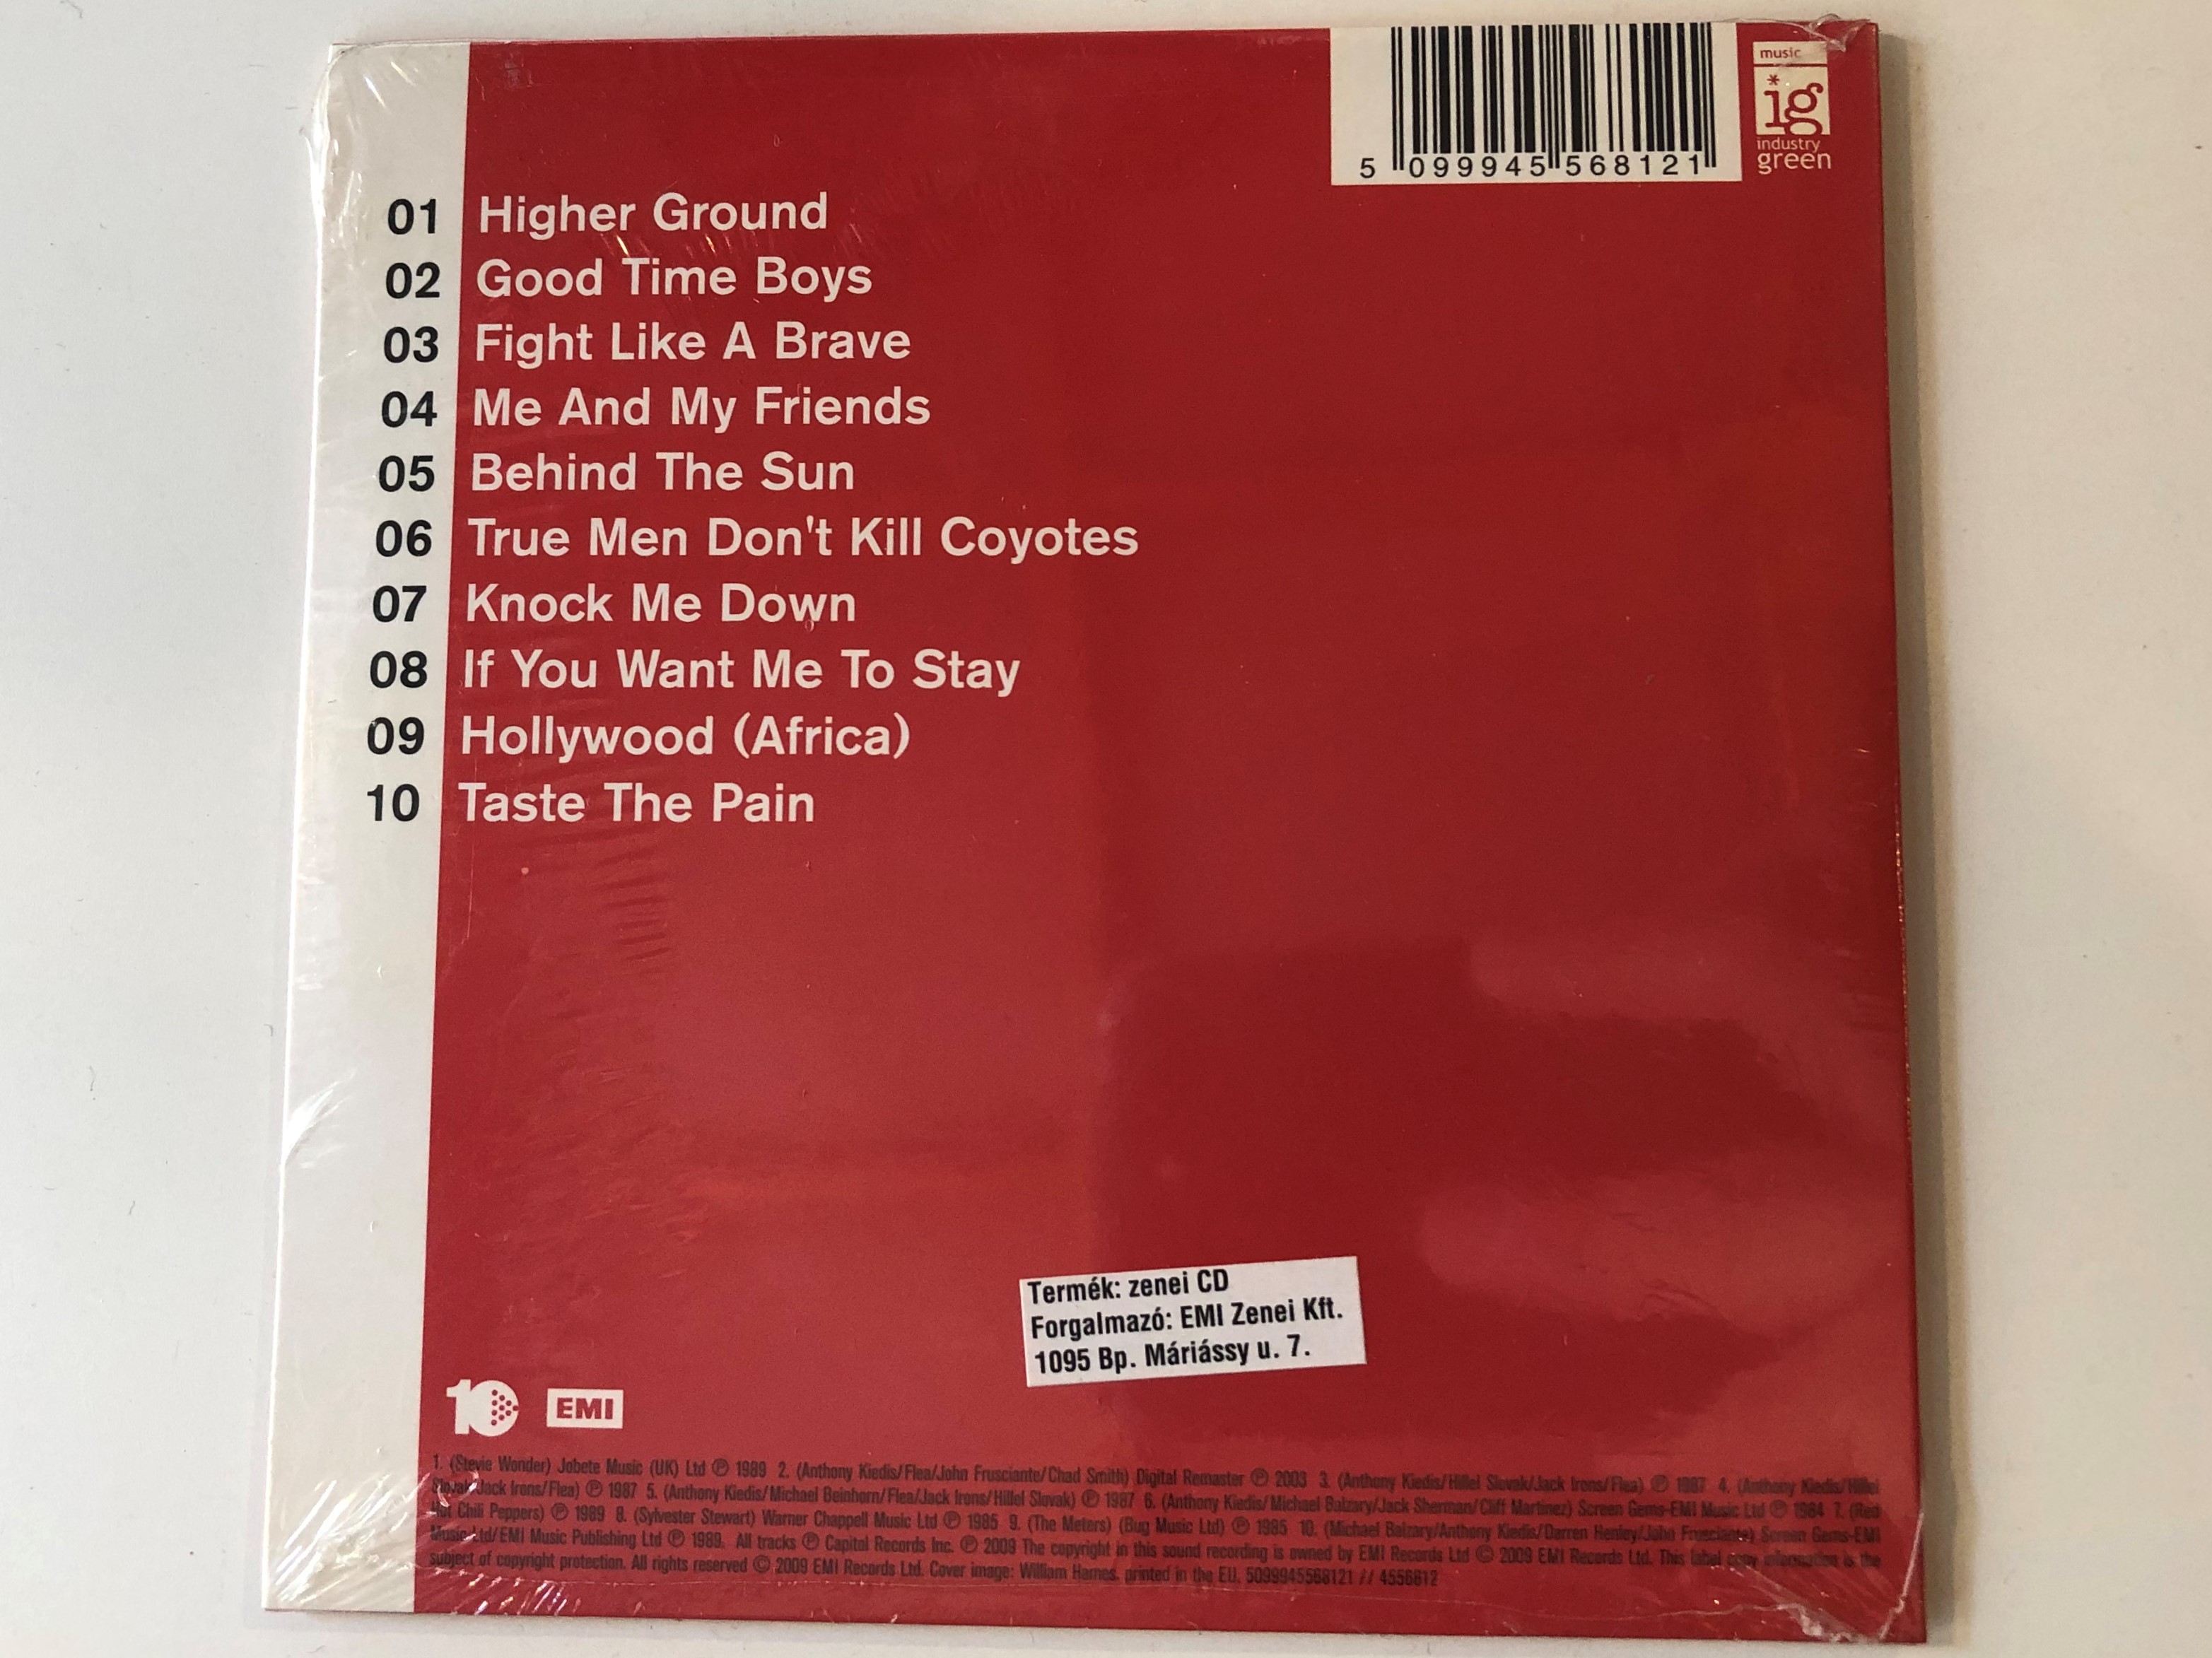 red-hot-chili-peppers-10-great-songs-emi-audio-cd-2009-5099945568121-2-.jpg